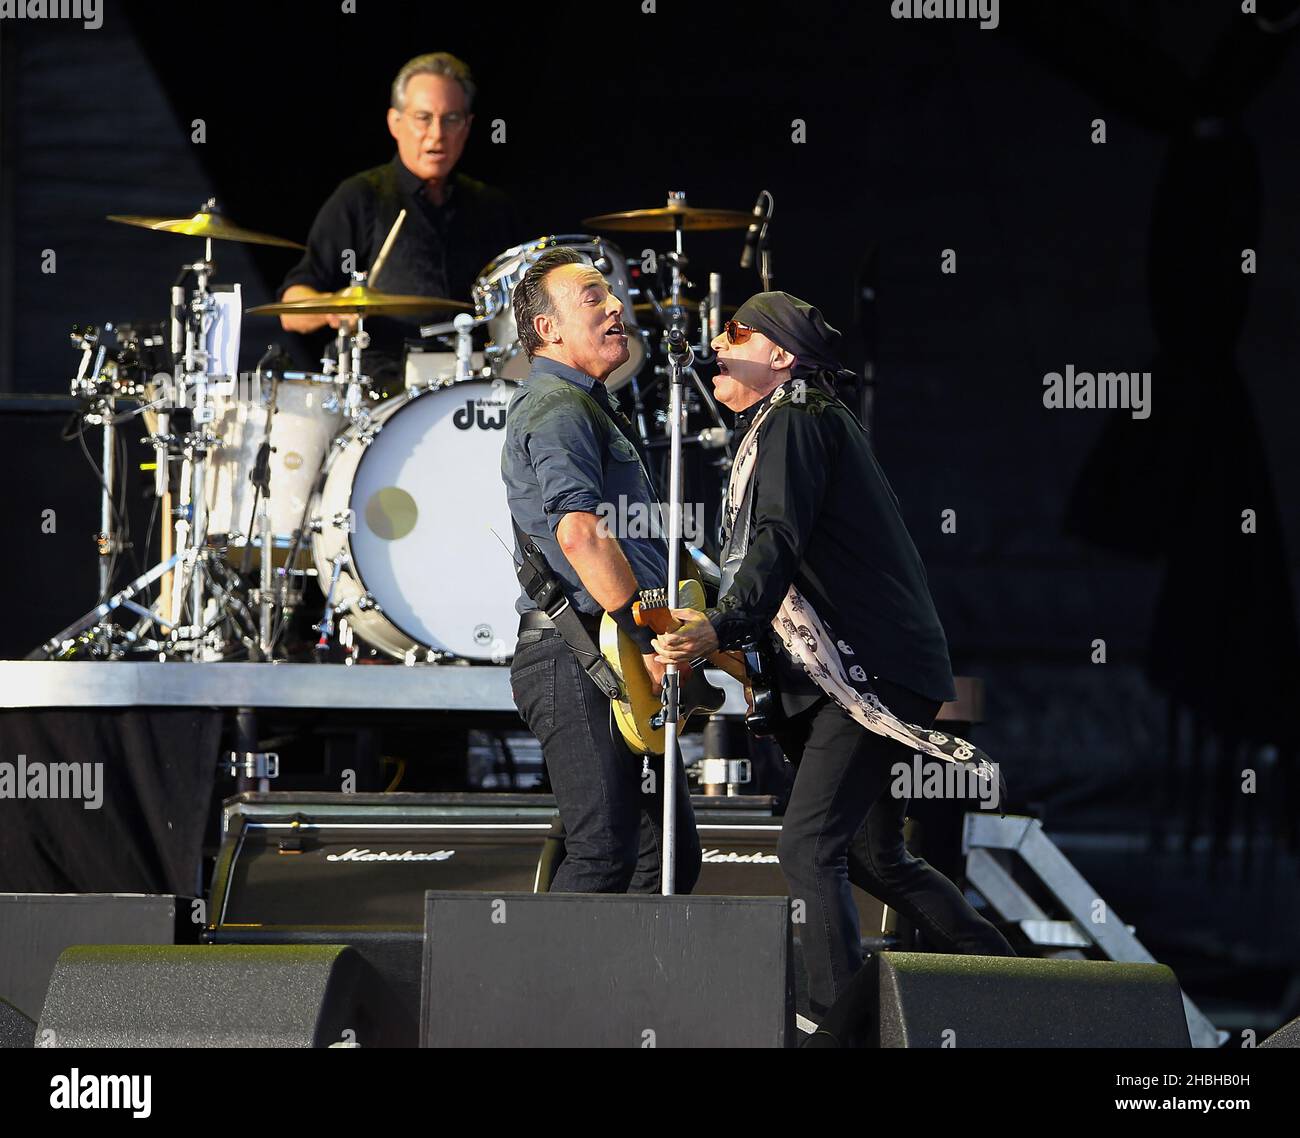 Headliner Bruce Springsteen performs alongside E Street Band guitarist Steven Van Zandt on stage during day 2 of Hard Rock Calling at Olympic Park, London Stock Photo